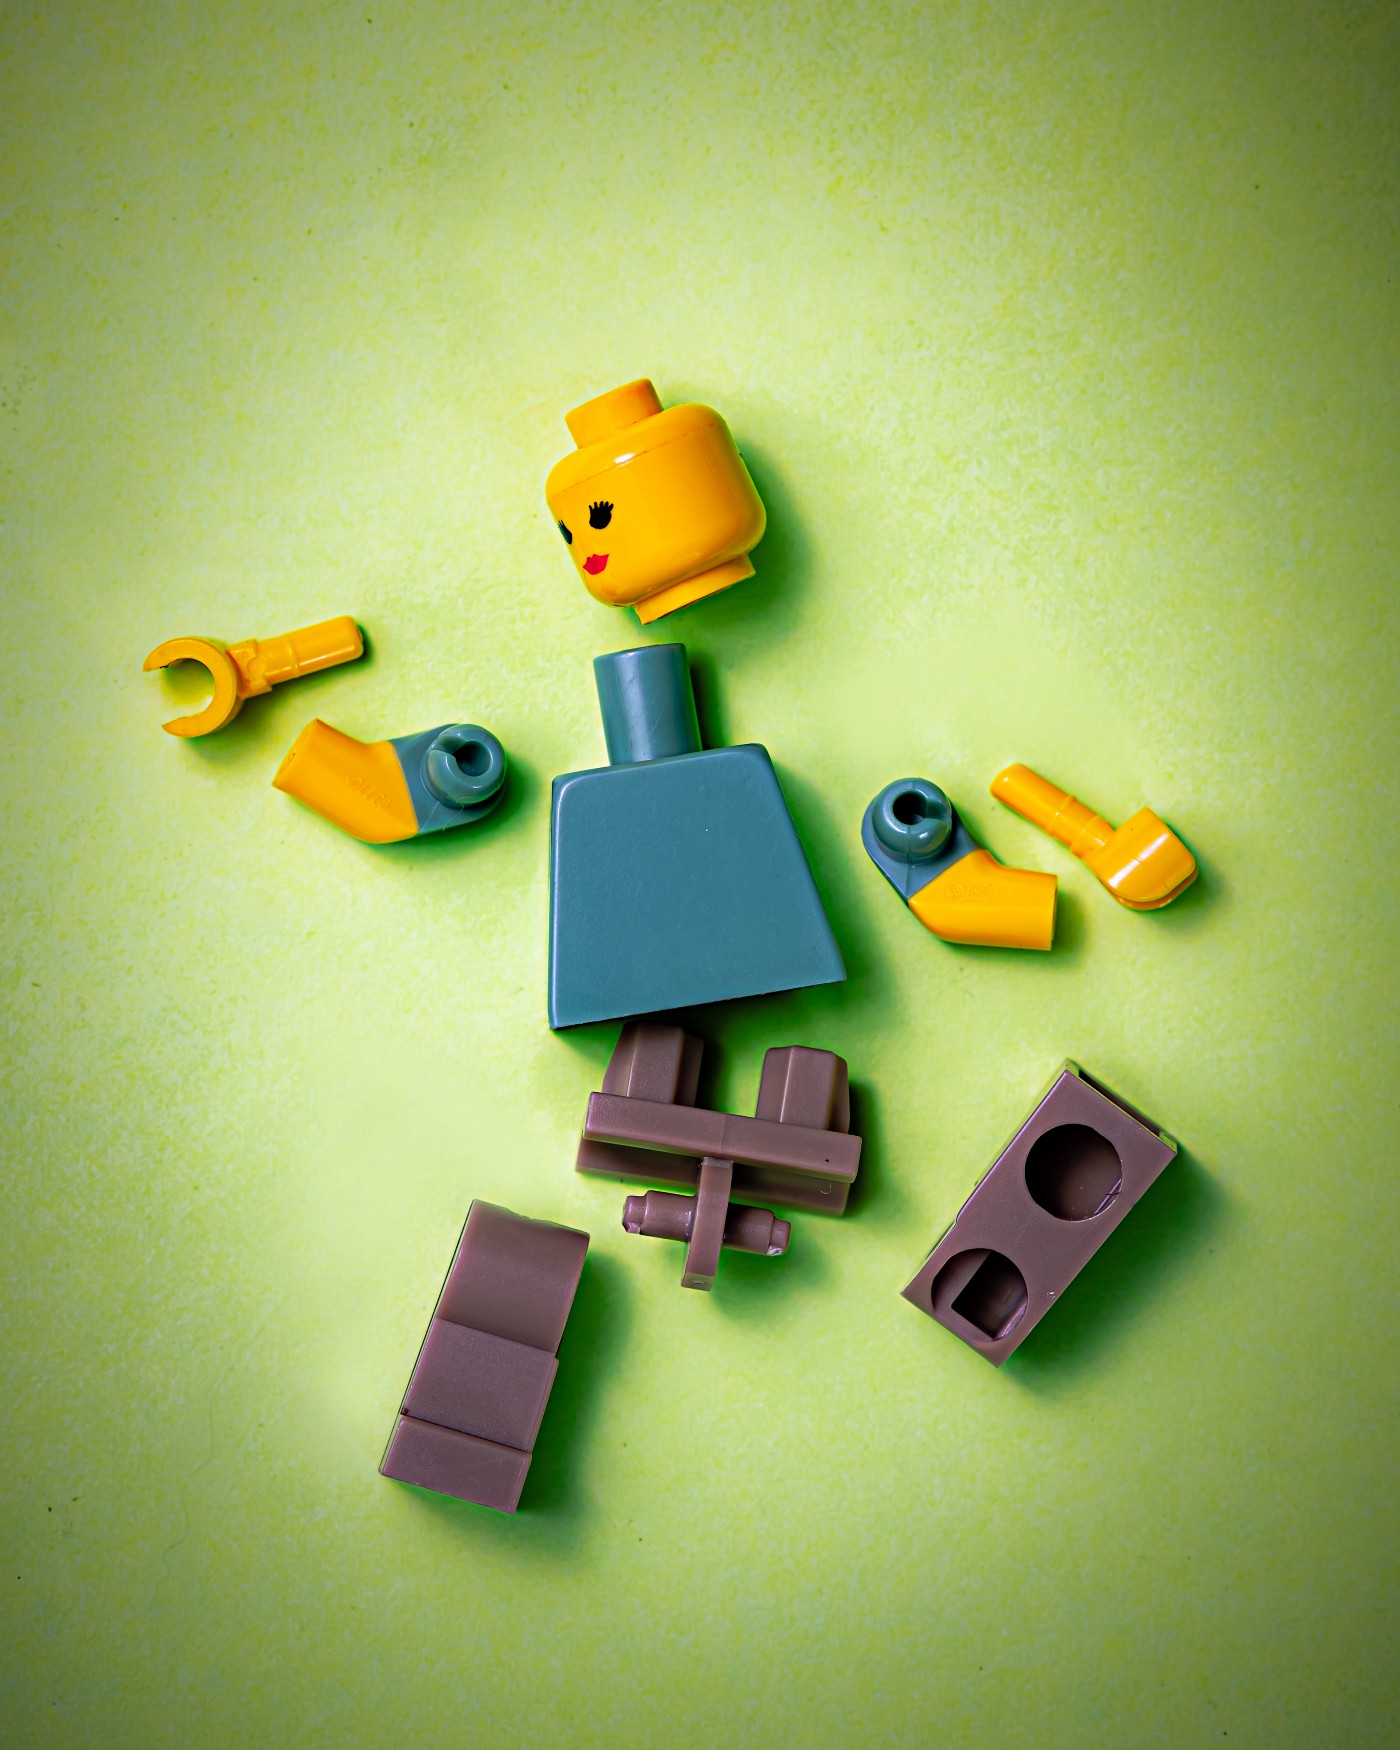 Unassembled Lego pieces to make human.